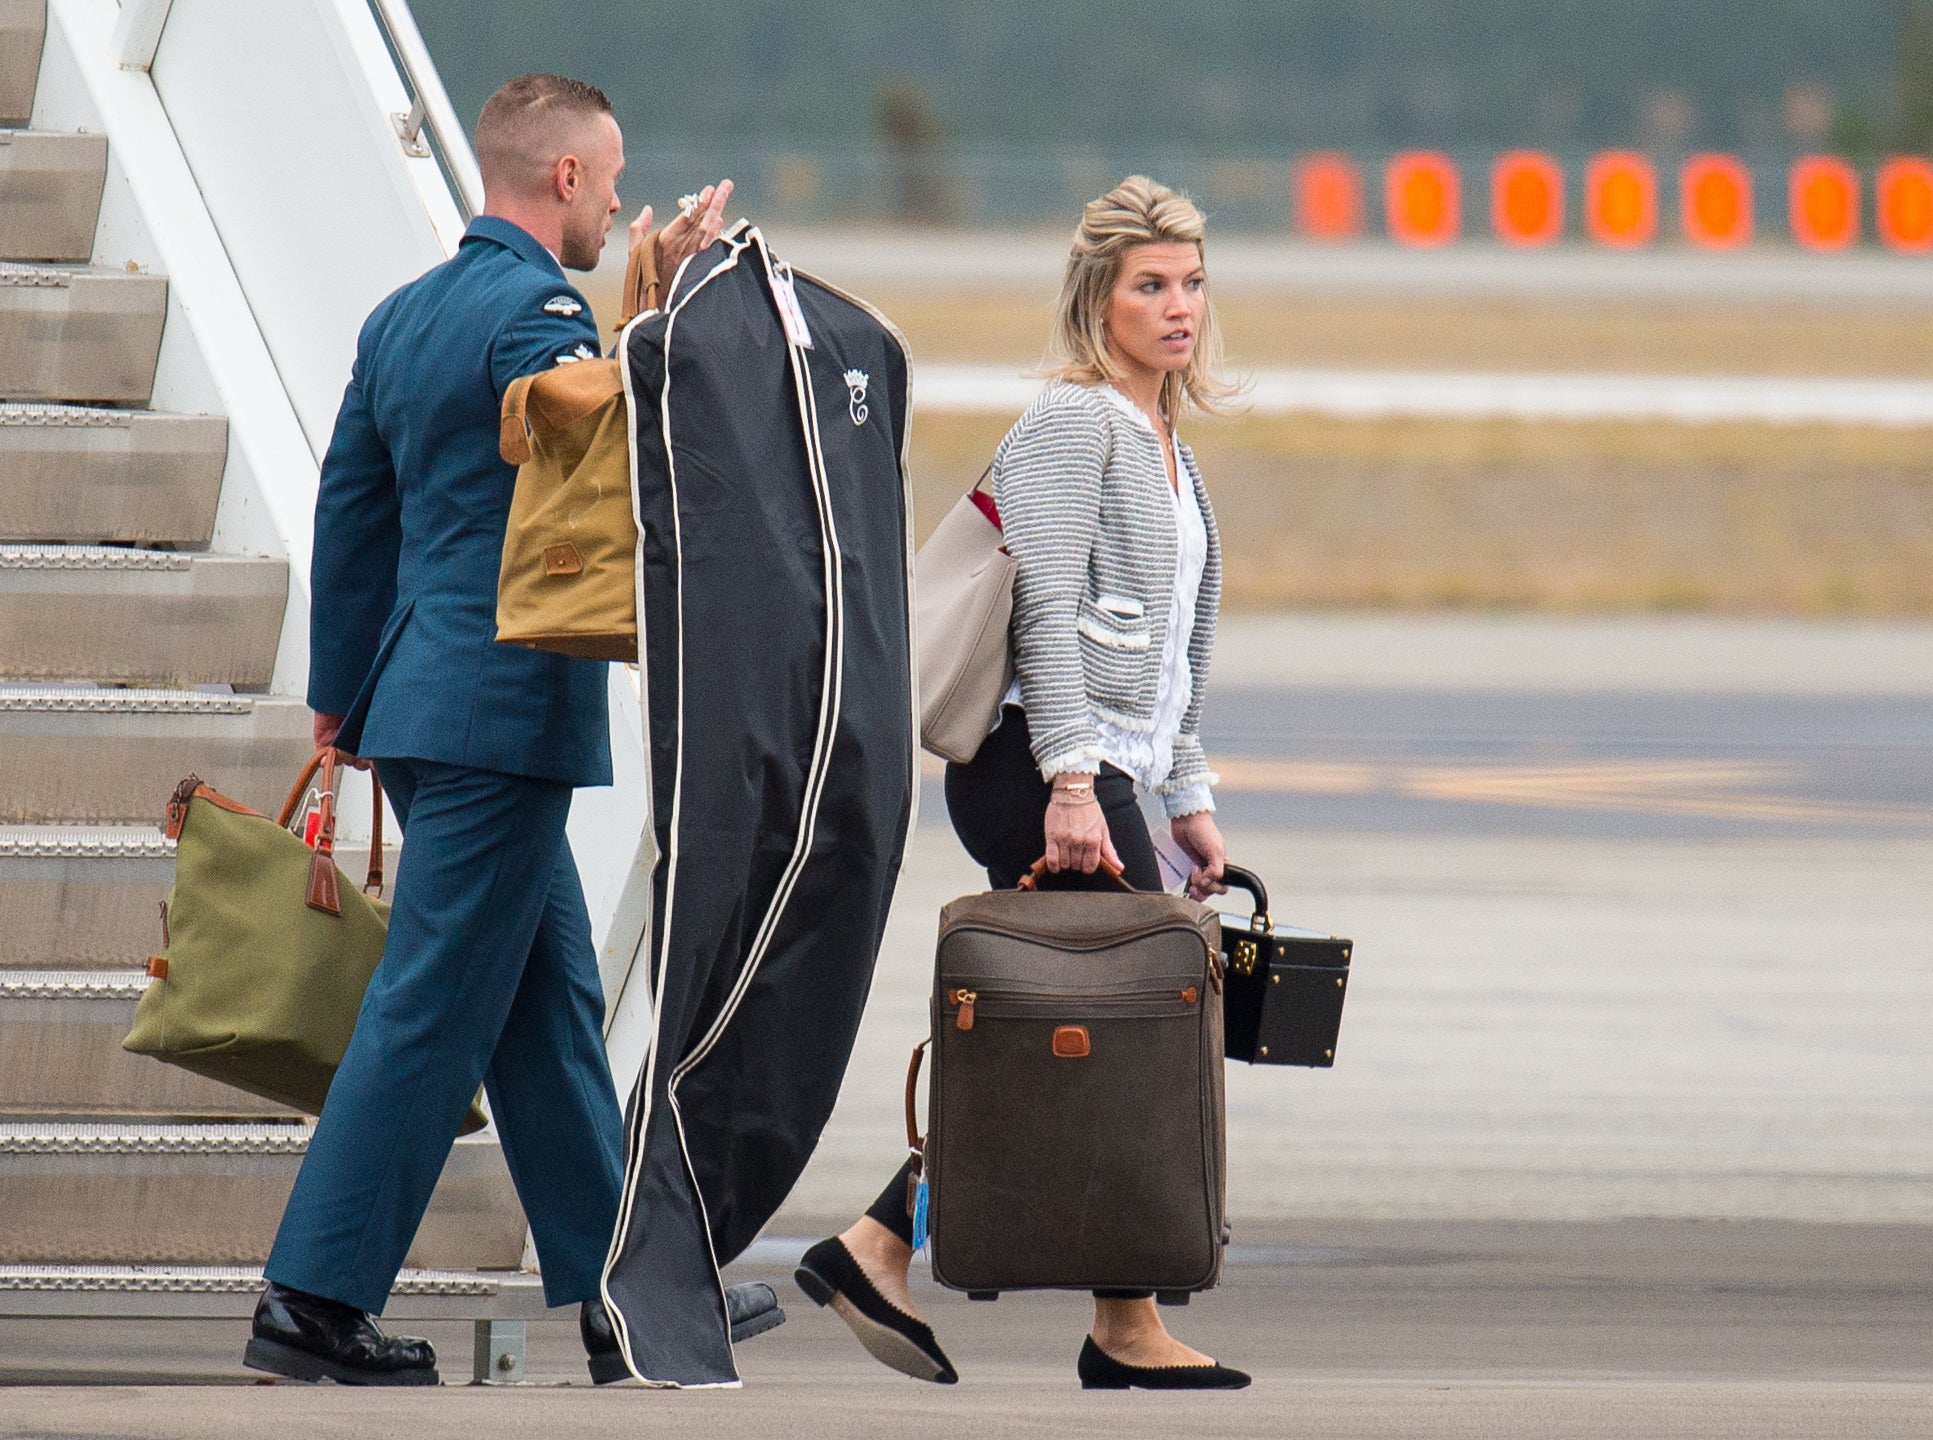 Natasha carrying the Princess’ bags from a plan in Canada during her 2016 royal tour